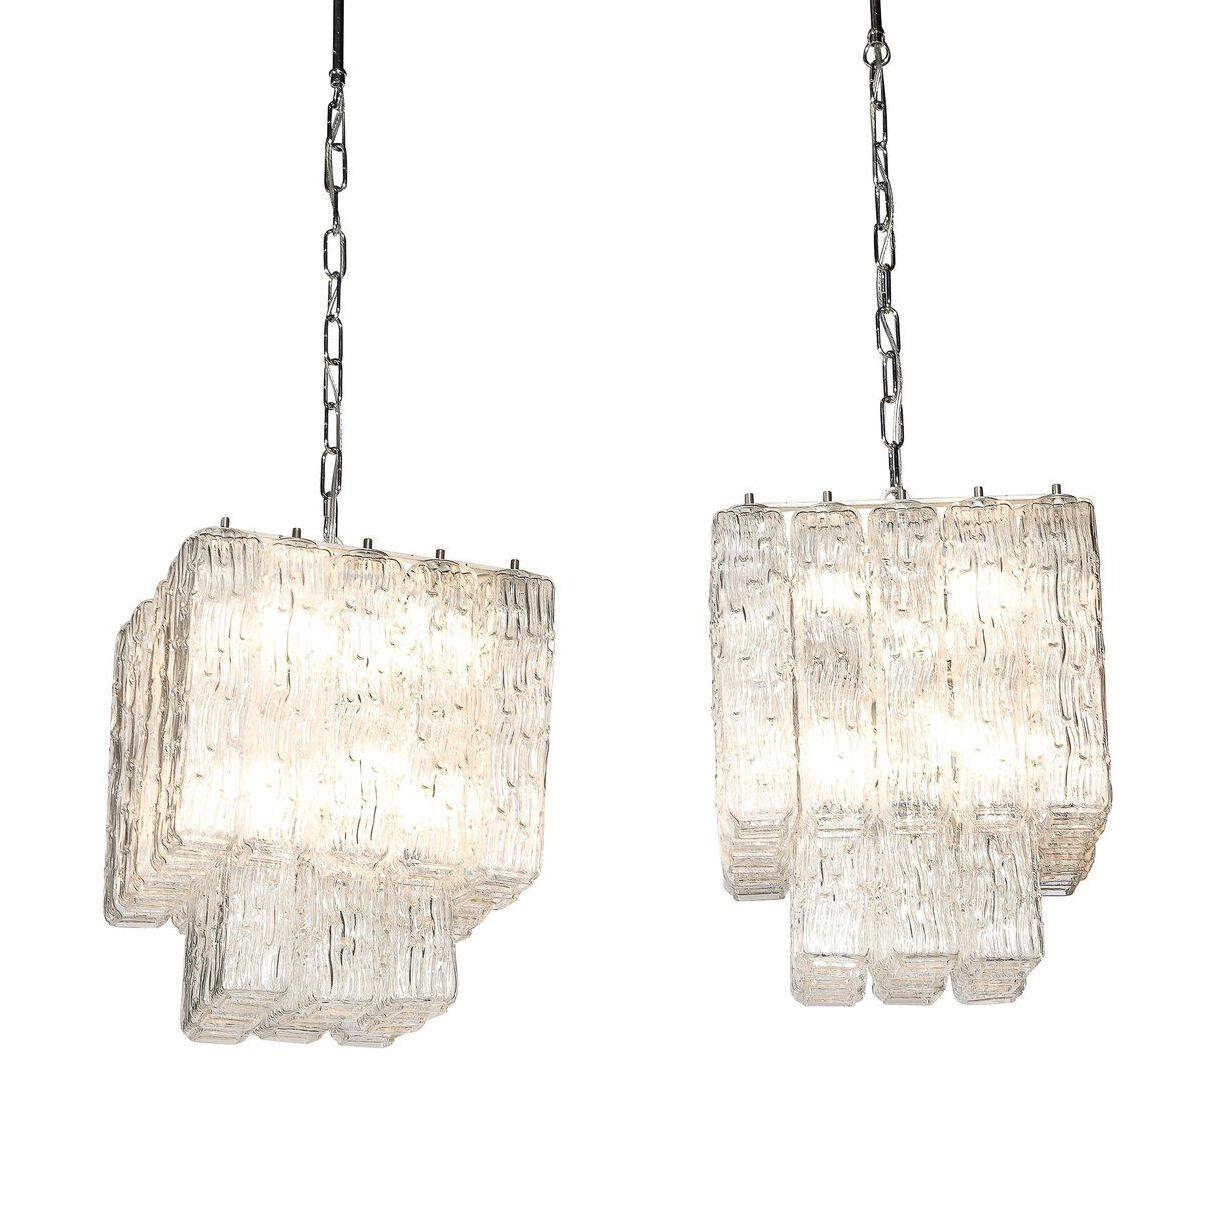 Pair of Mid-Century Modern Two Tier Murano Glass Tronchi Chandeliers by Venini